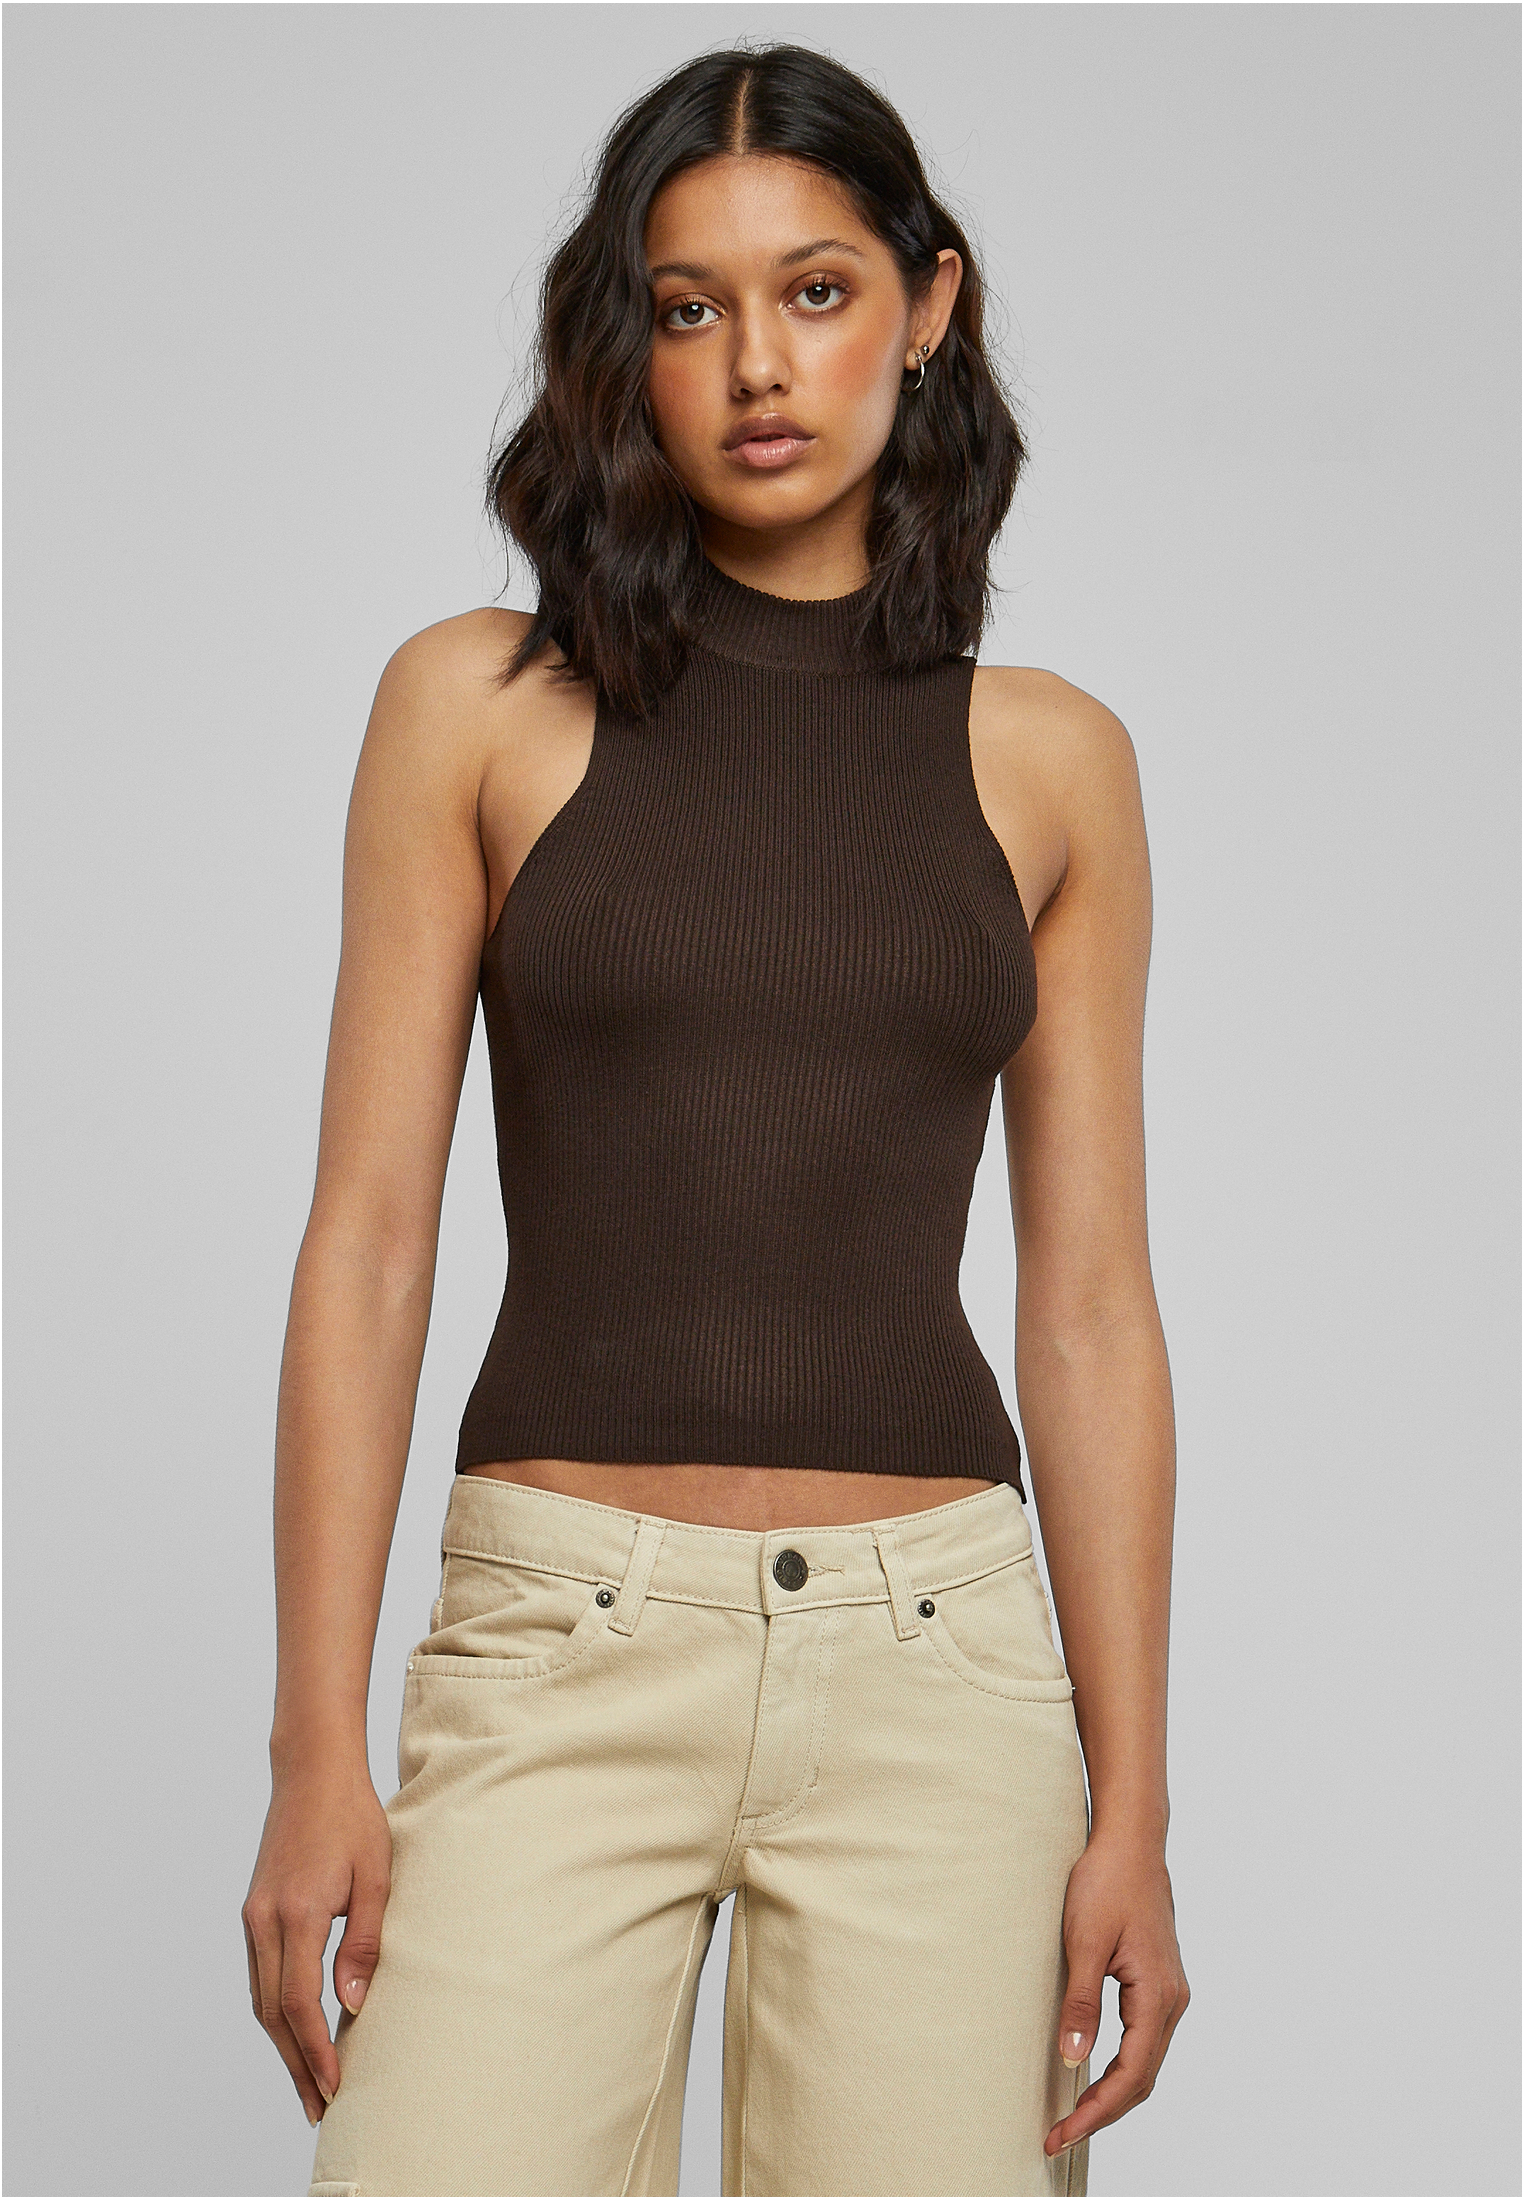 Women's Turtleneck With Short Rib Knit Brown